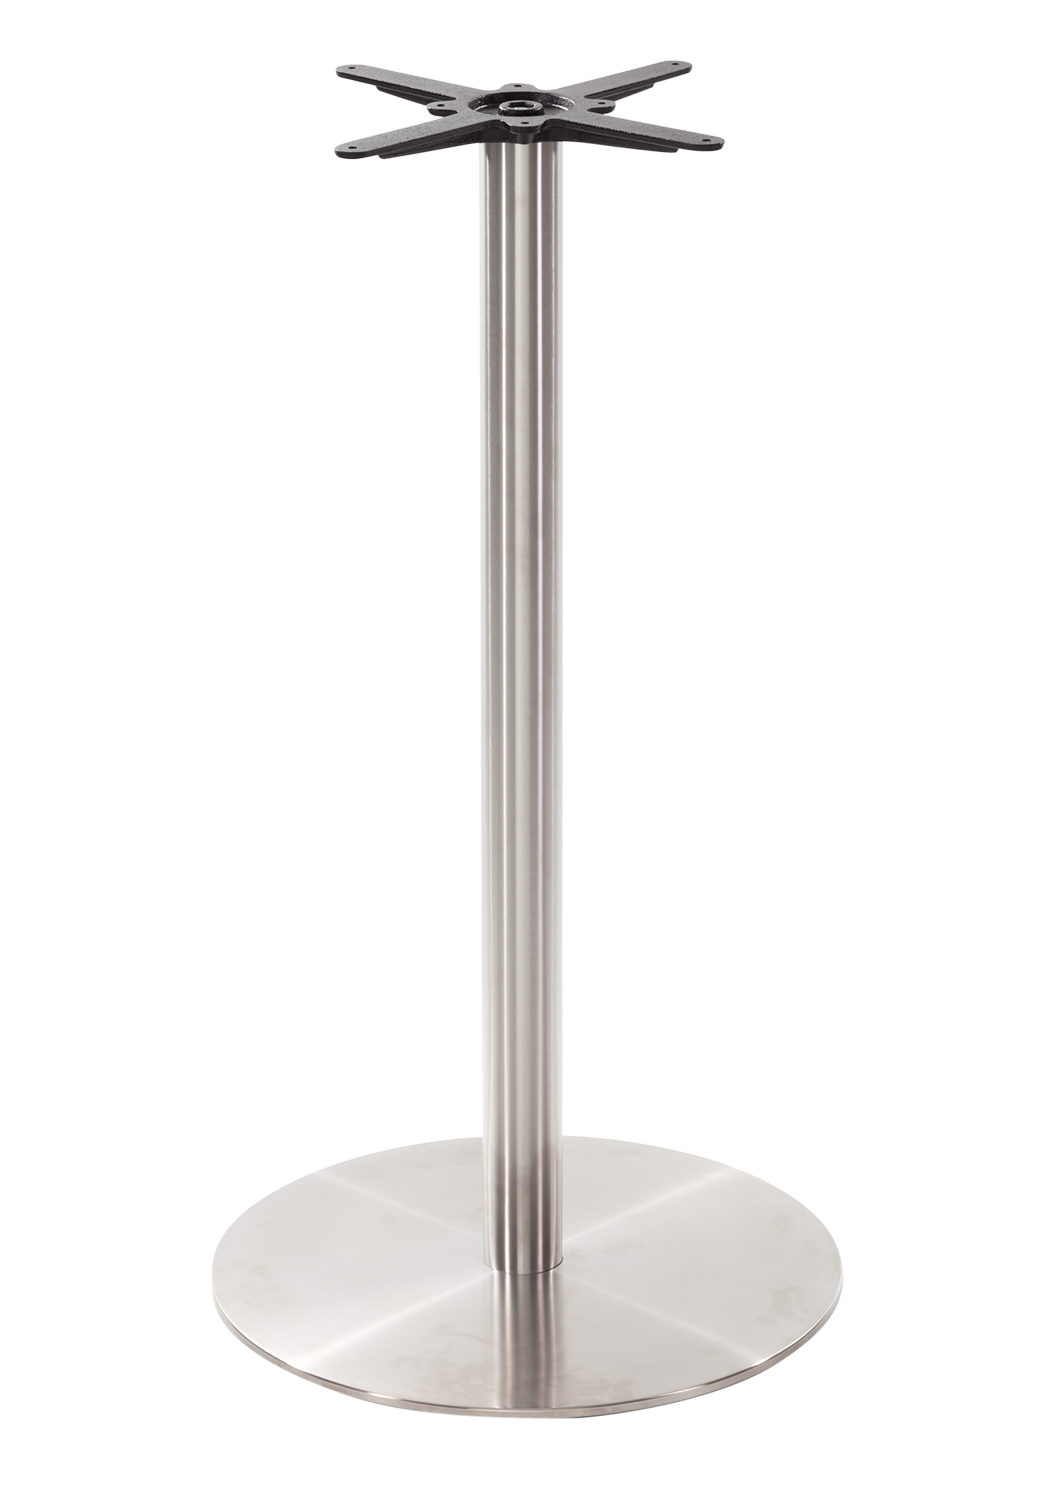 Round stainless steel table base - Large 1050 mm